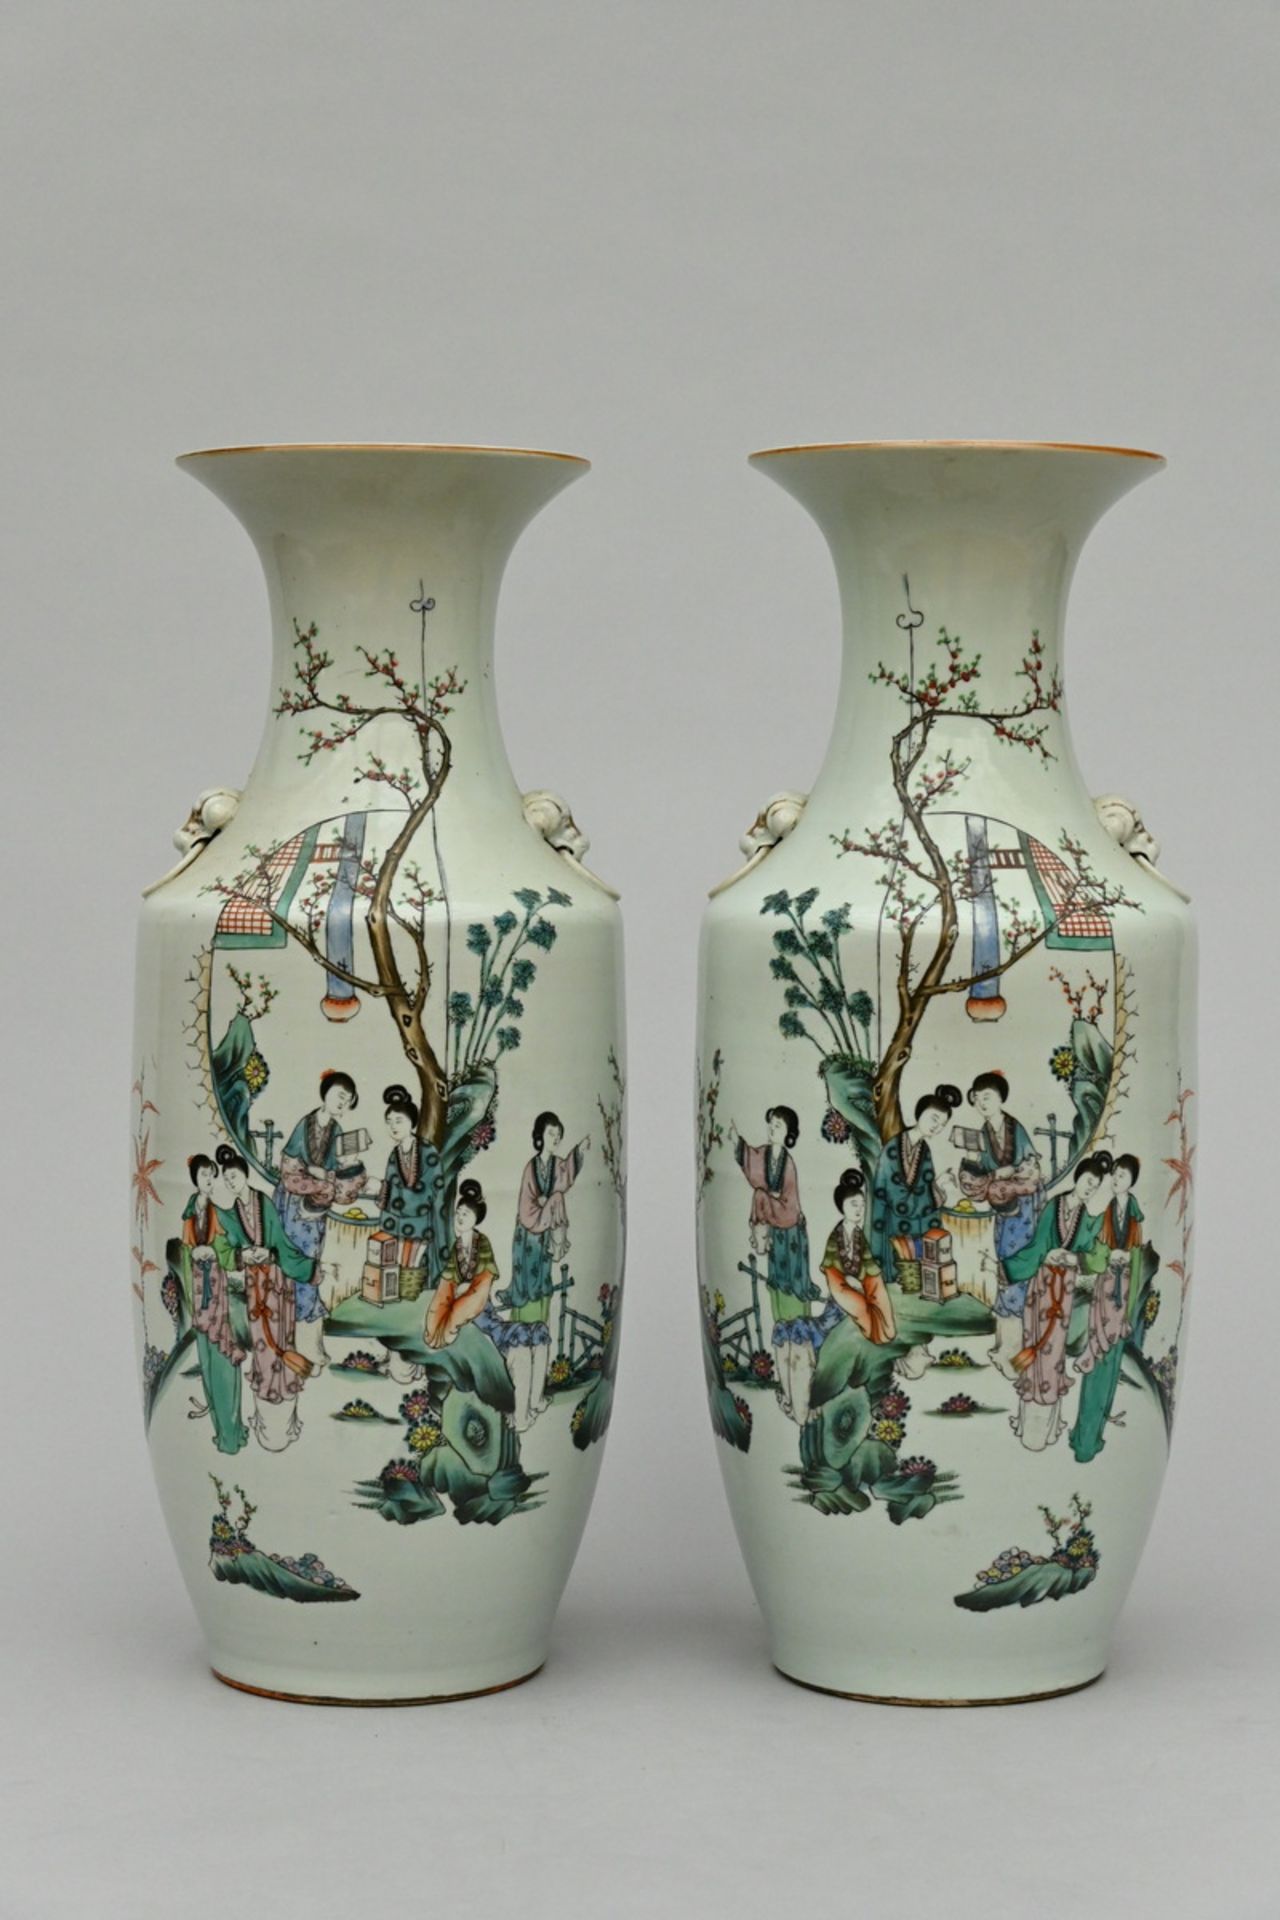 A pair of vases in Chinese porcelain 'ladies in a landscape', Republic period (h56cm)